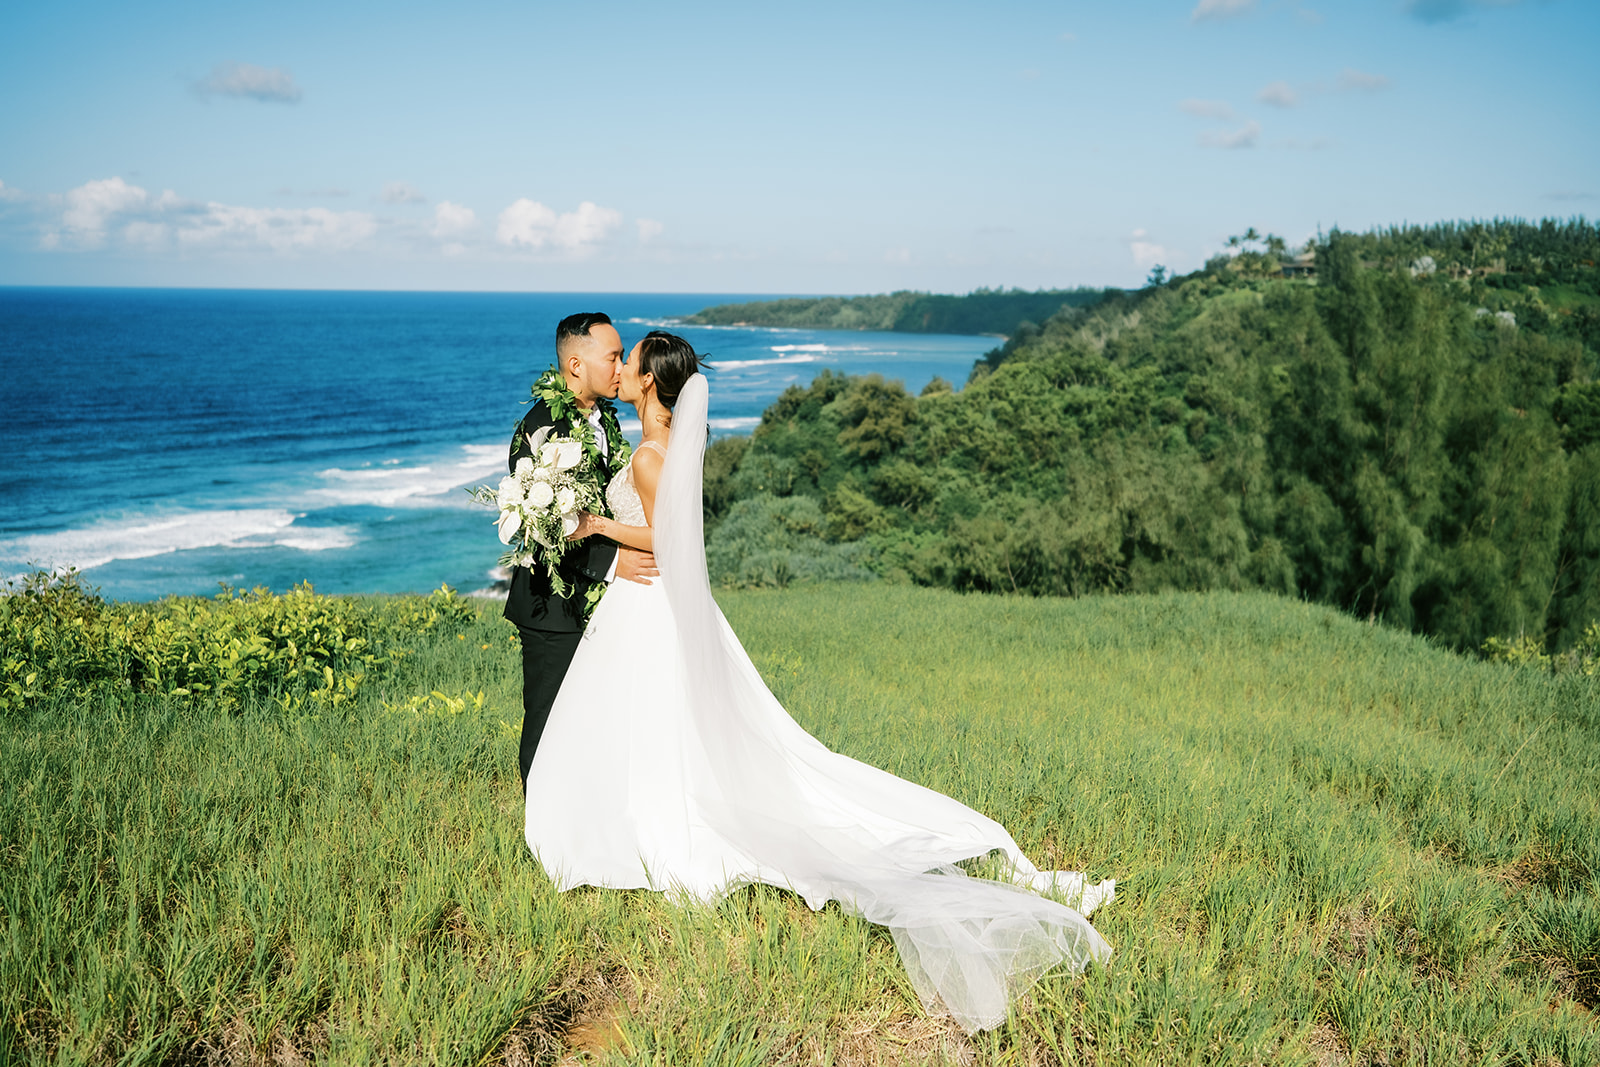 Newlyweds sharing a kiss on a grassy hill overlooking the ocean Wedding at Na Aina Kai takenby Oahu Wedding Photographer